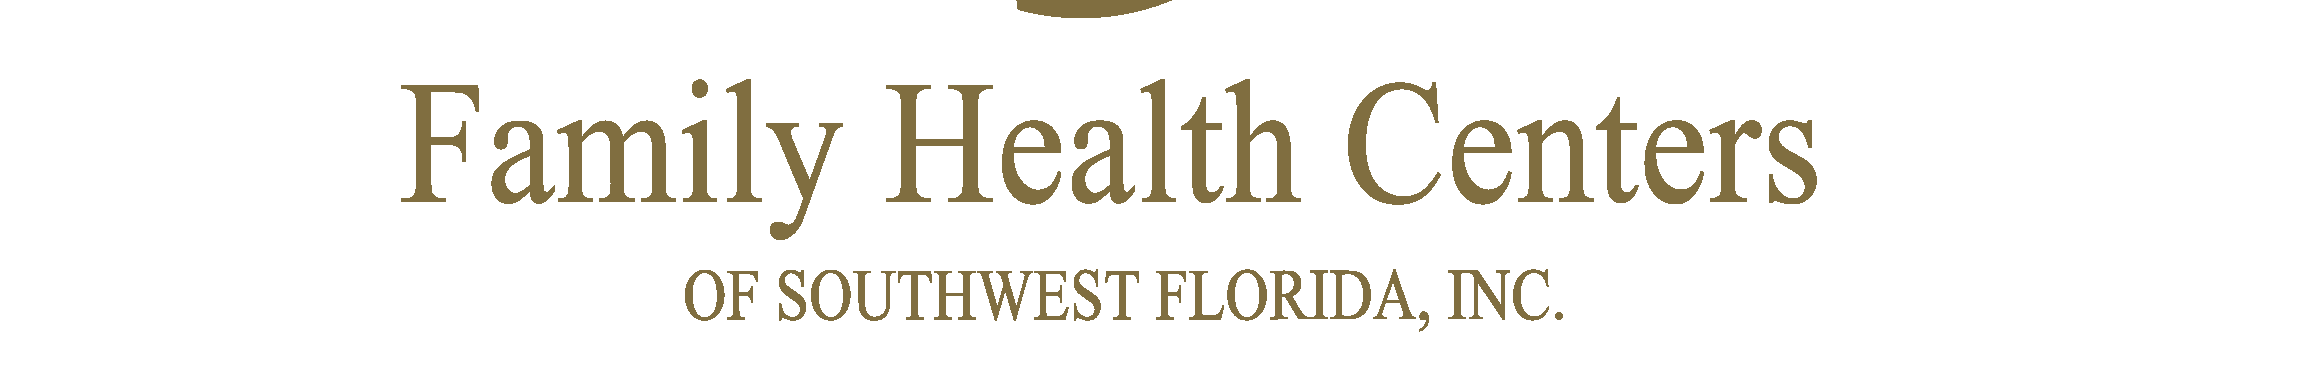 Family Health Centers of SouthWest Florida background